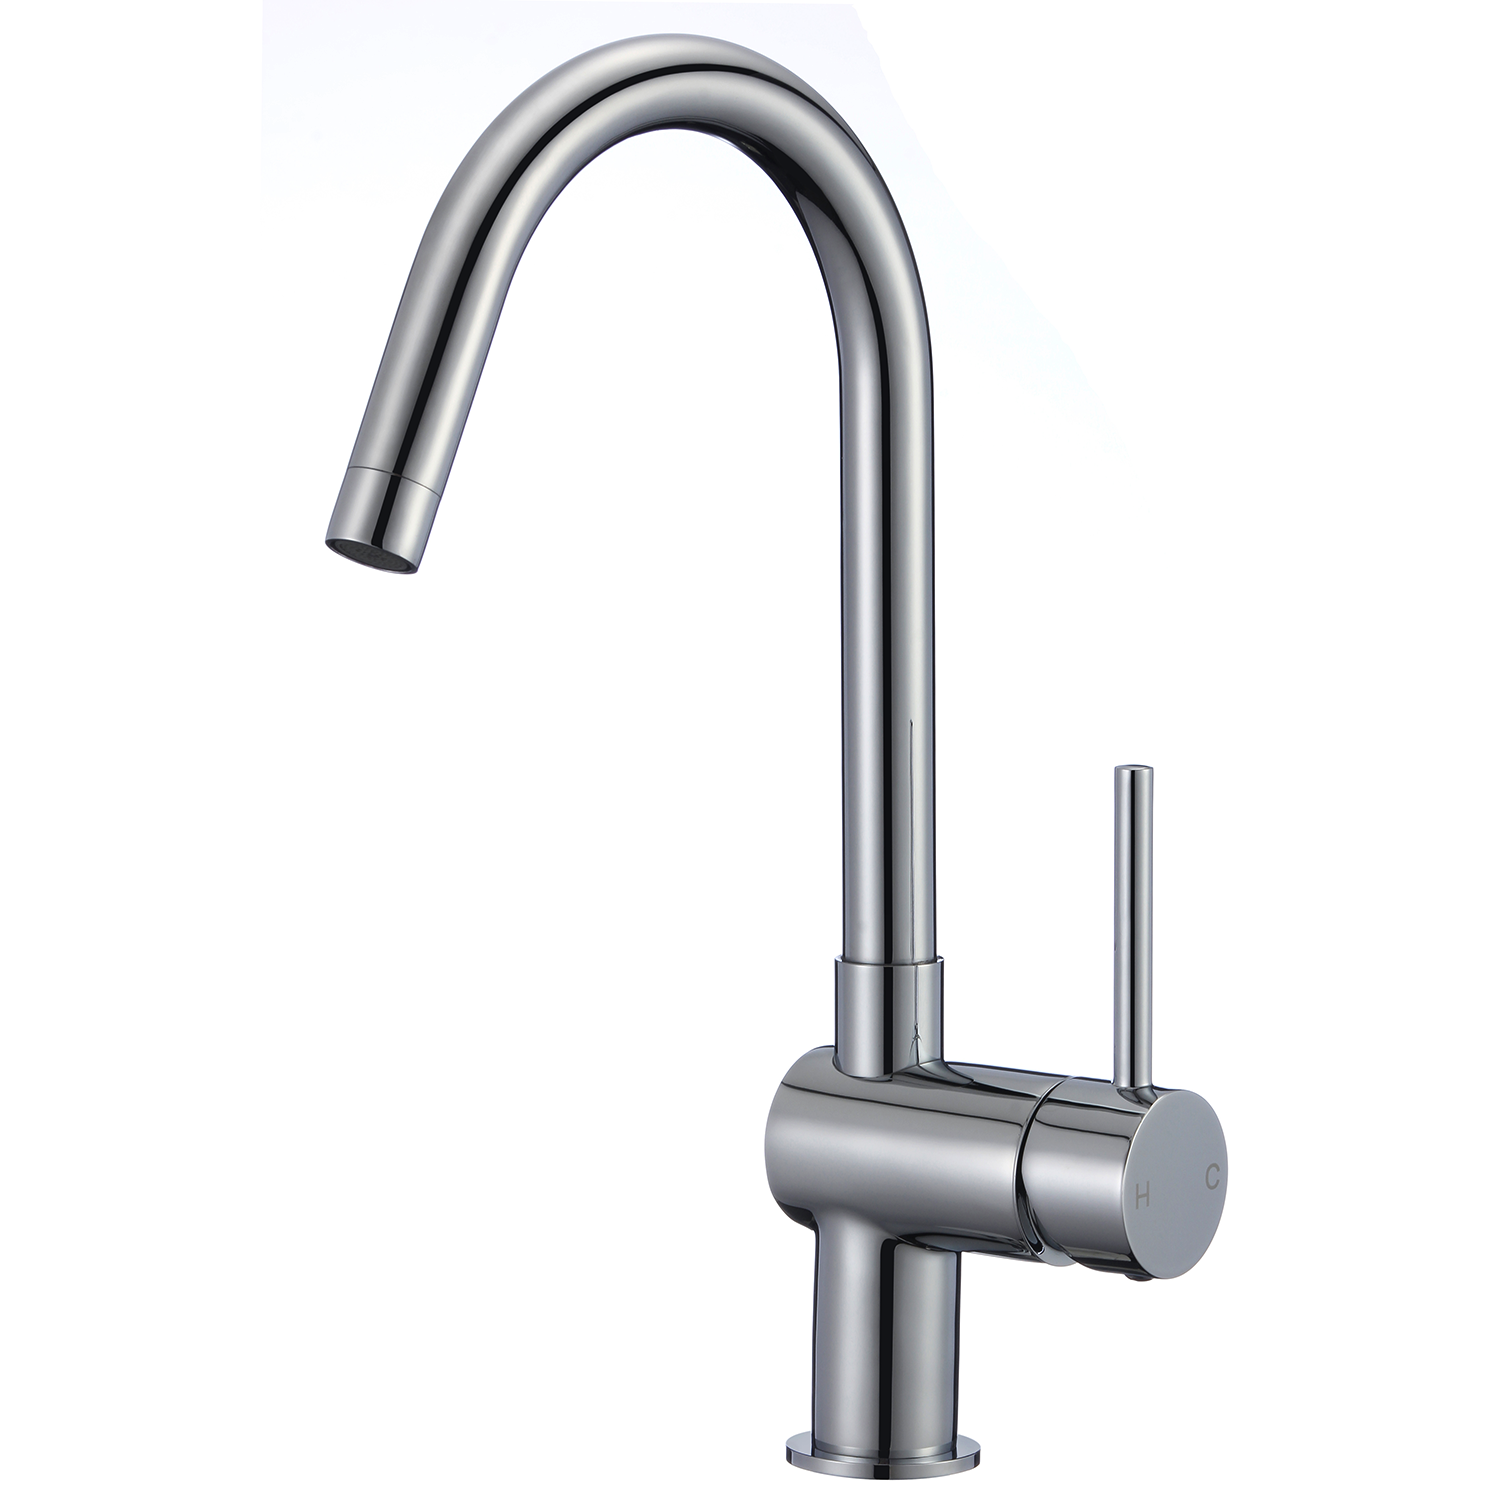 DAX Single Handle Kitchen Faucet Brushed Nickel Finish (DAX-8240-BN)